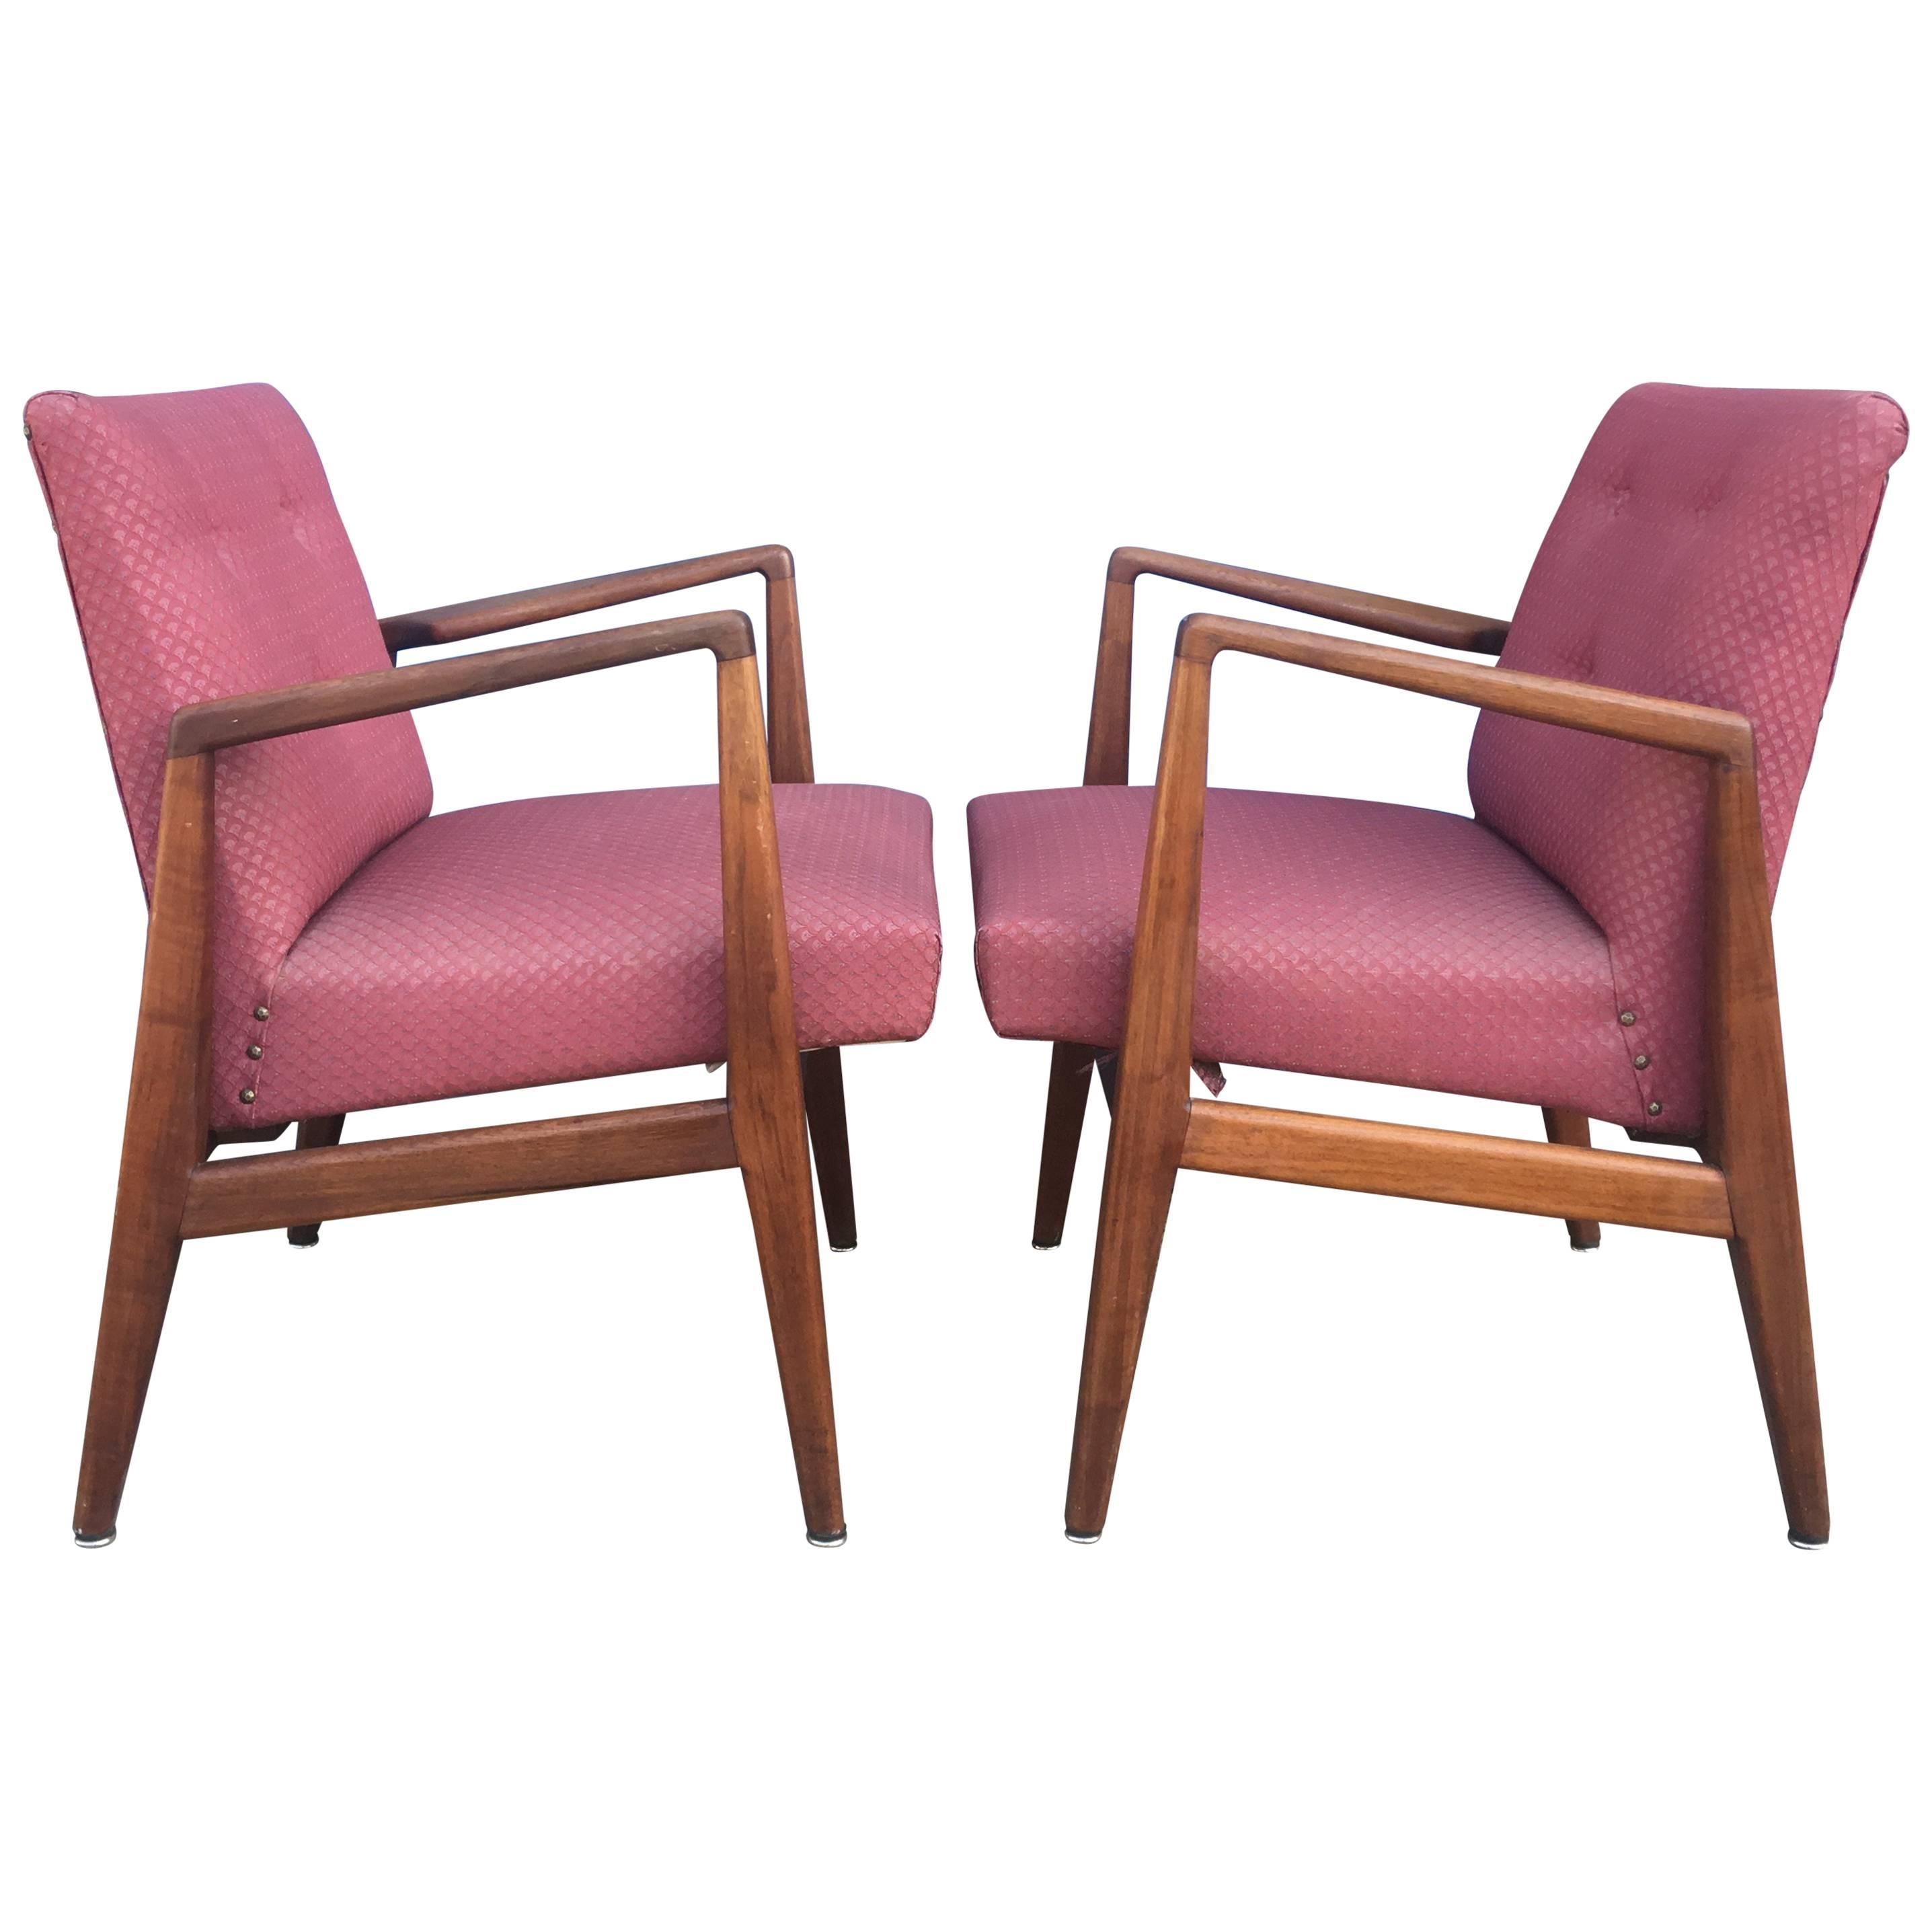 Two Gorgeous Jens Risom Sculptural Walnut Armchairs